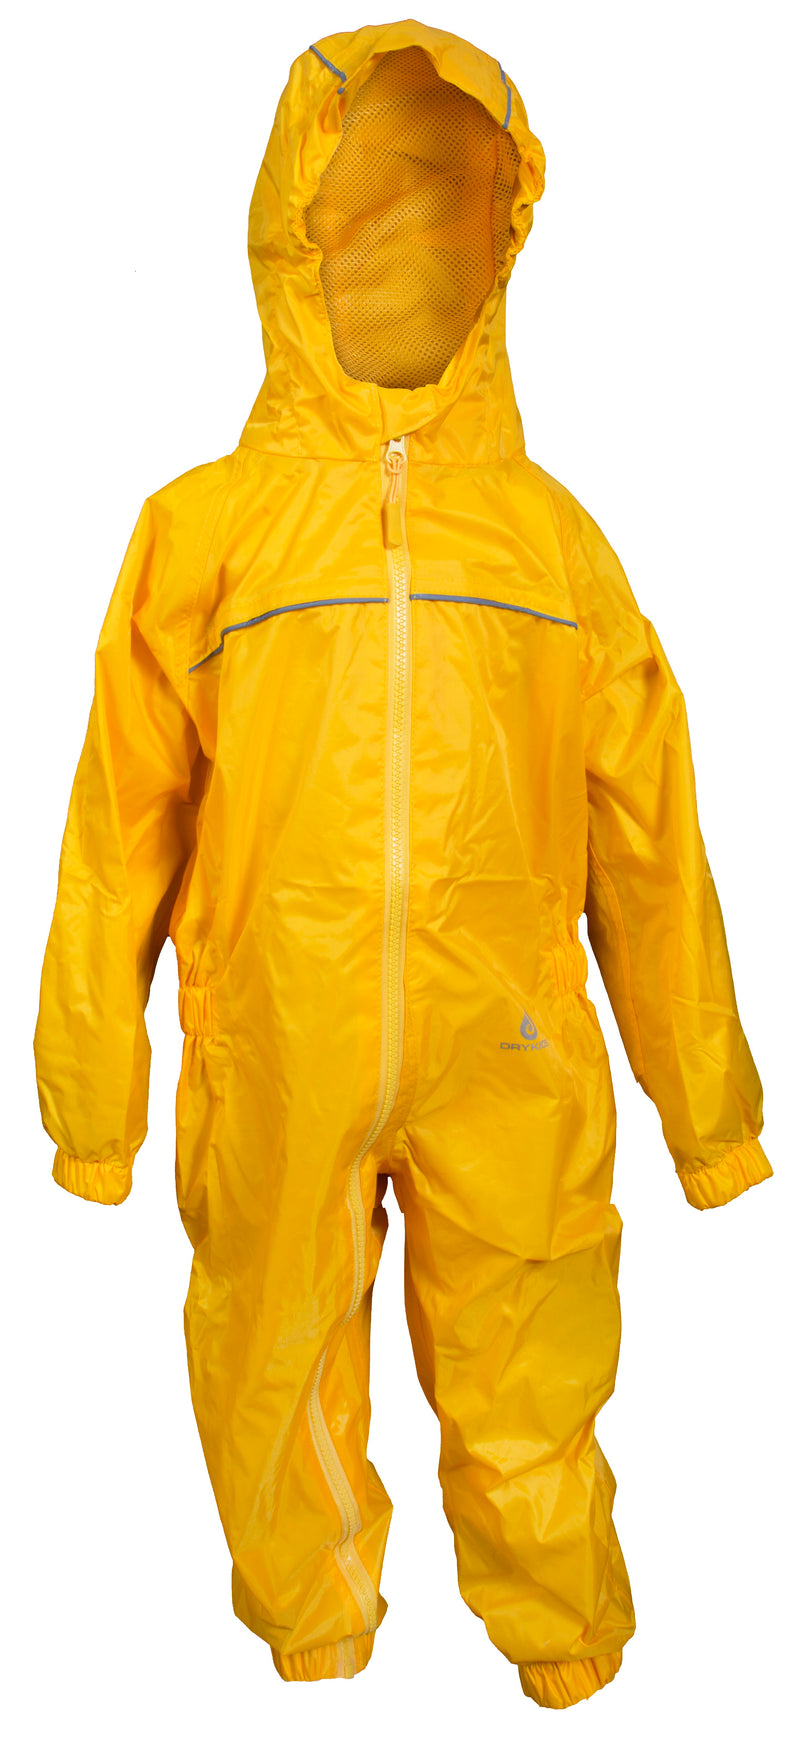 All-in-One Rainsuit